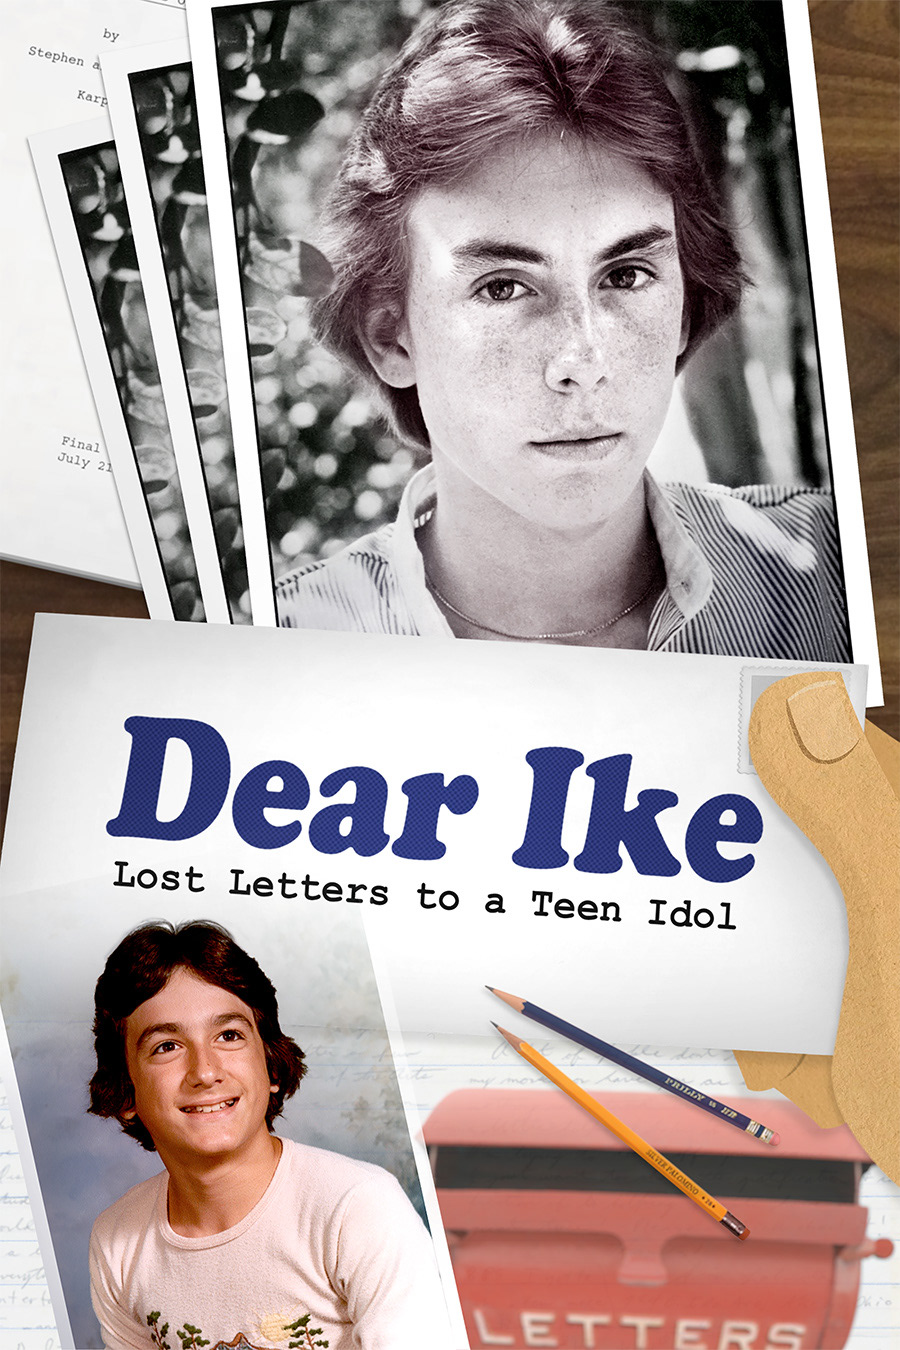 DEAR IKE: LOST LETTERS TO A TEEN IDOL Comes To The PBS App And WORLD Channel For Pride Month 